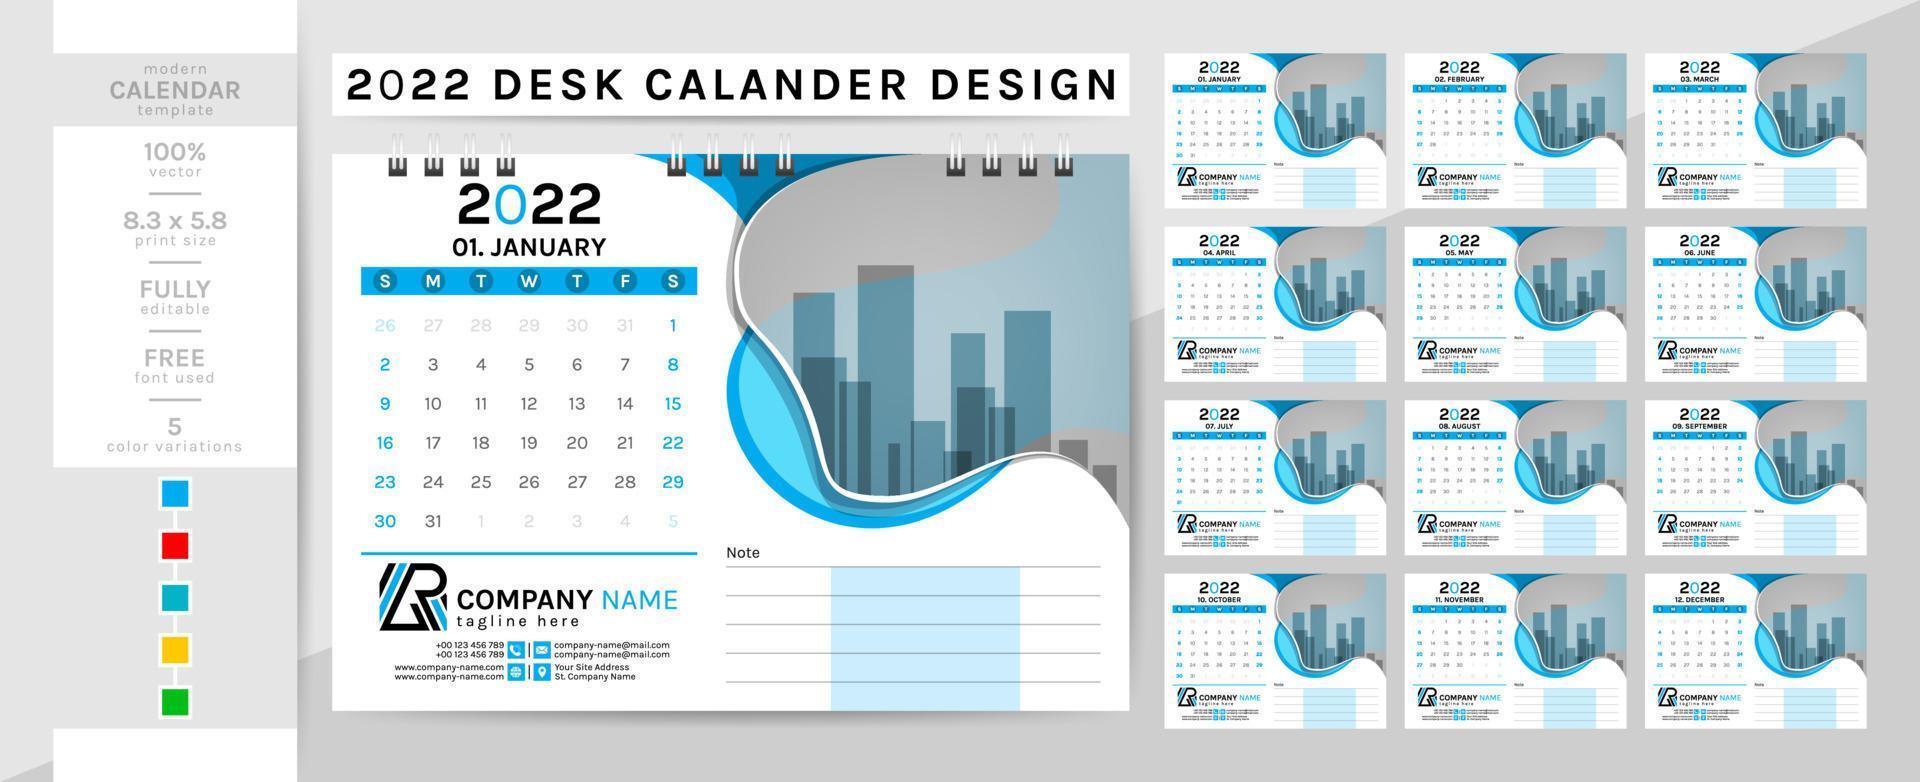 Desk calendar and planner diary template for the year 2022. This creative elegant calendar is a must for your home and office. 2 theme colorwork, black, and others. The 12-page week begins on Sunday. vector